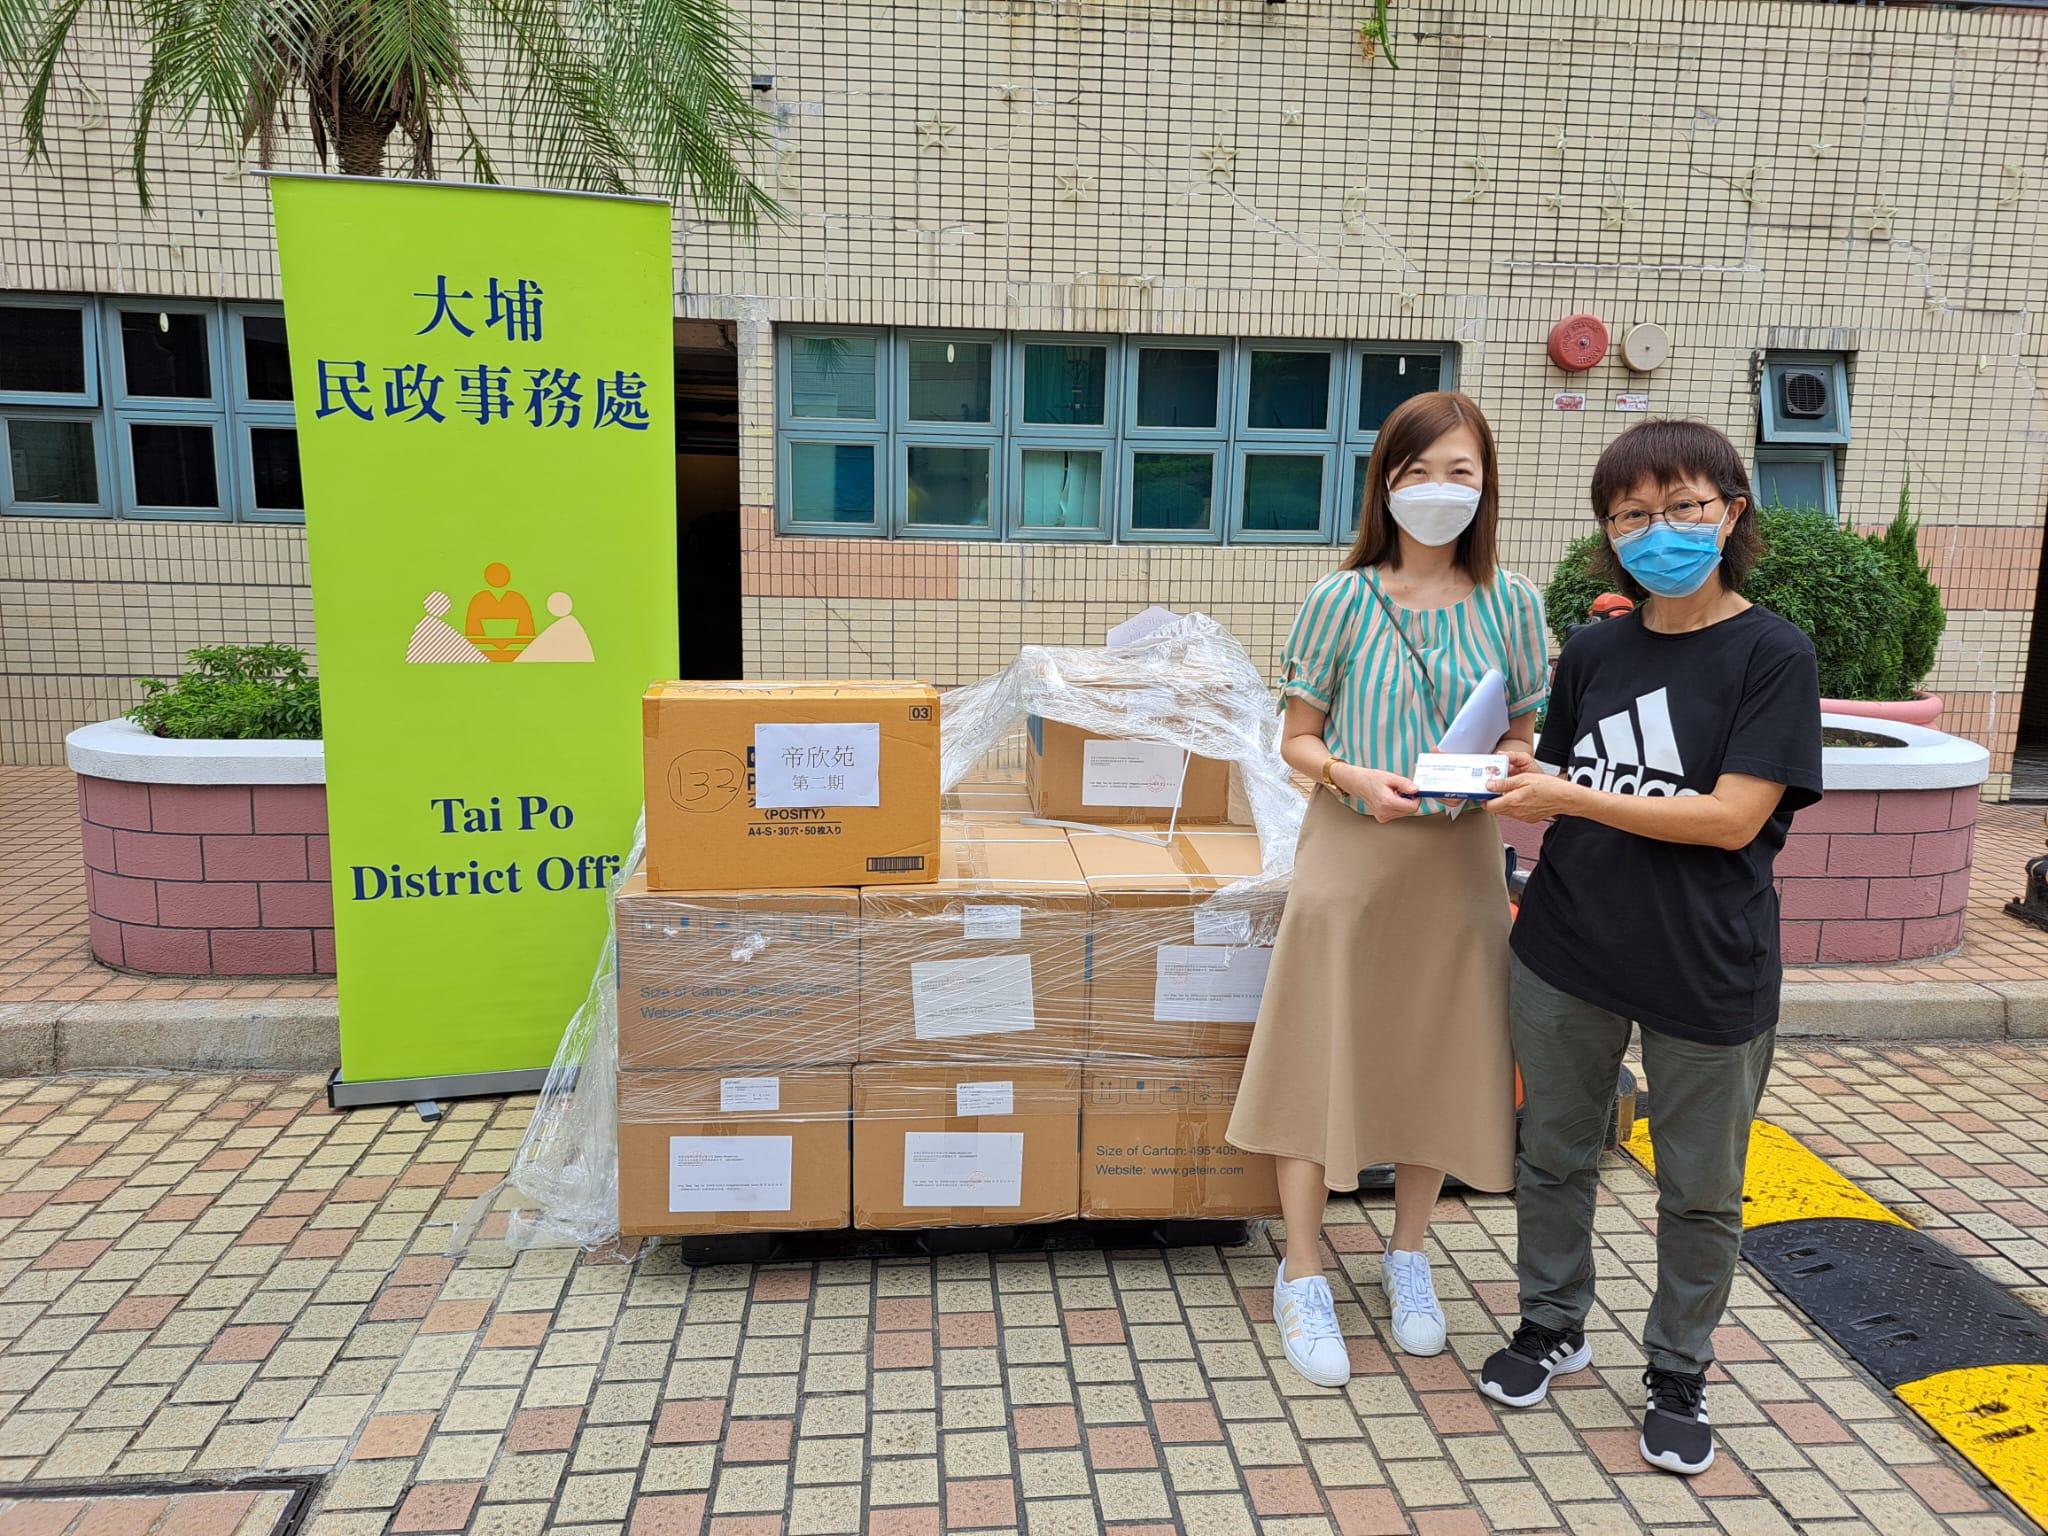 The Tai Po District Office today (August 3) distributed COVID-19 rapid test kits to households, cleansing workers and property management staff living and working in Parc Versailles for voluntary testing through the property management company.

